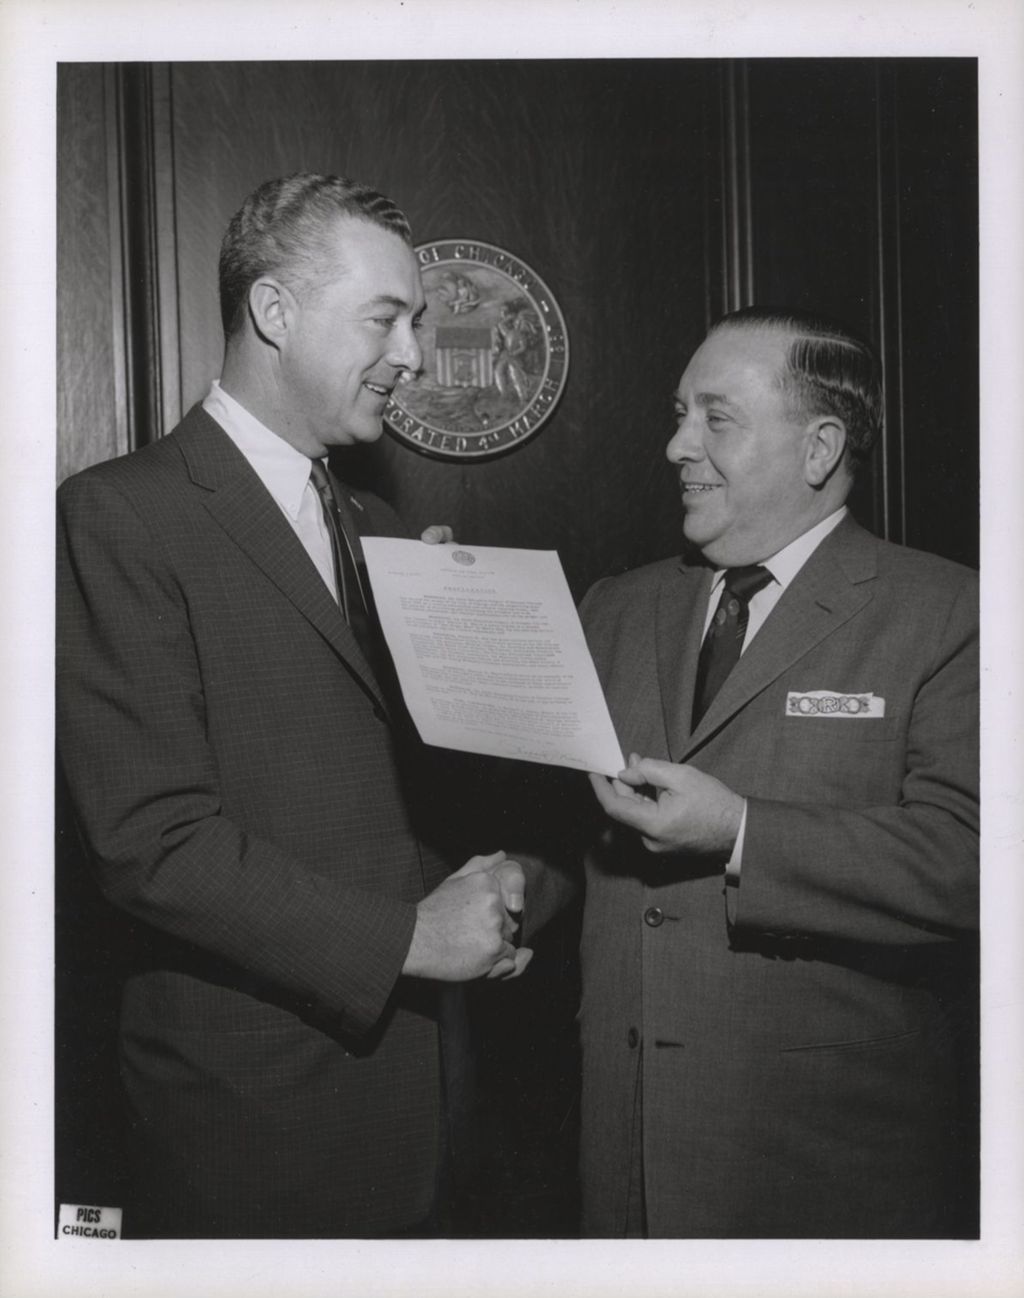 Miniature of Richard J. Daley presenting a mayoral proclamation to a man